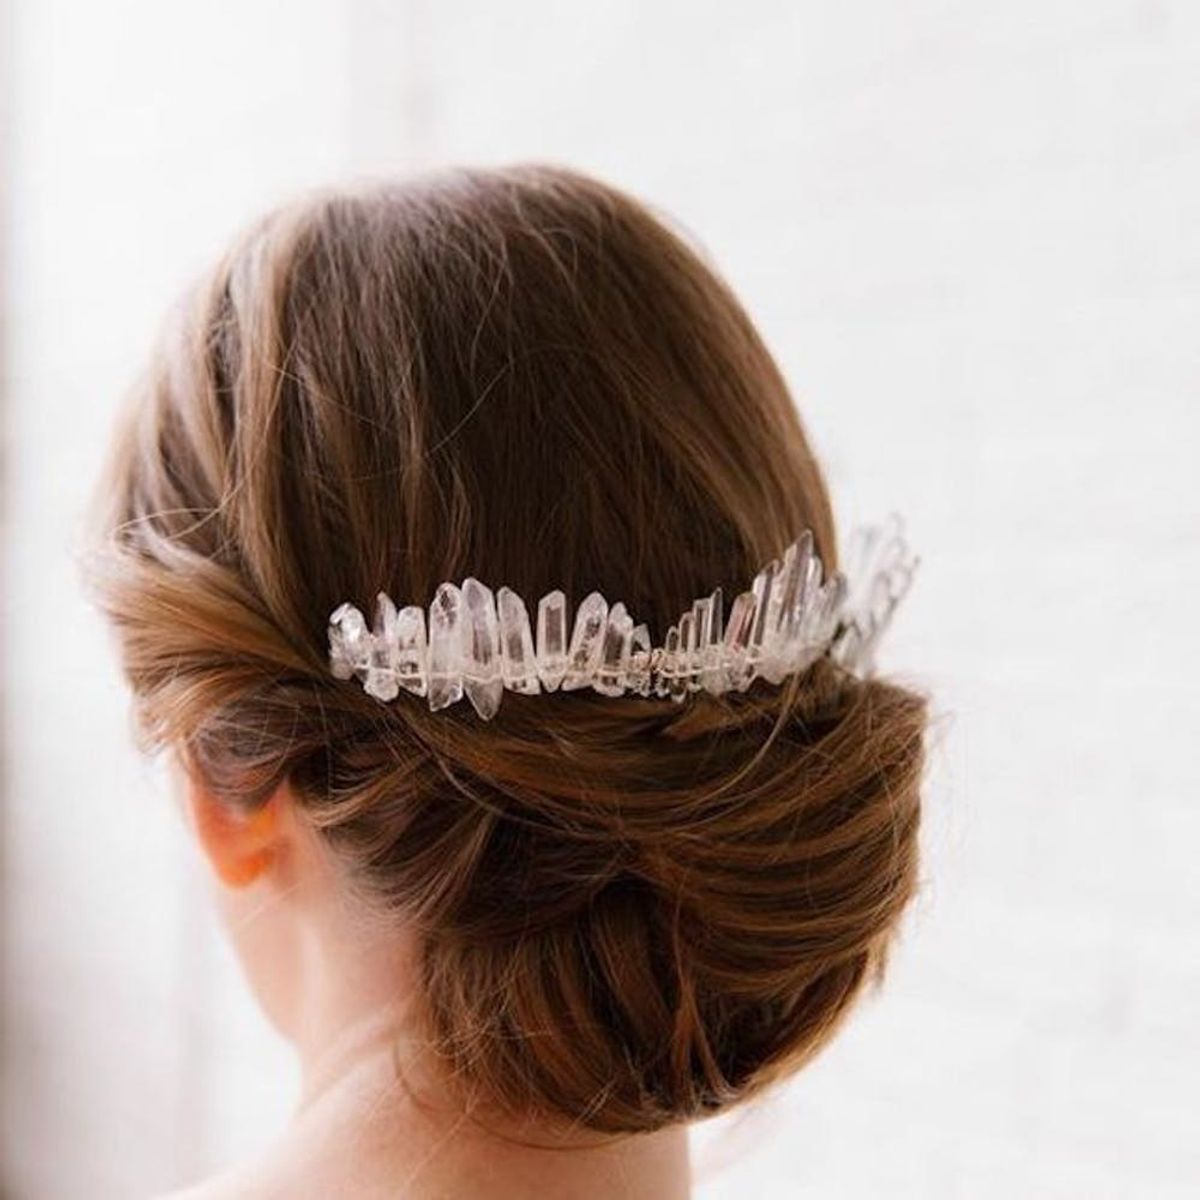 33 Bridal Bun Hairstyle Ideas for Your Wedding Day